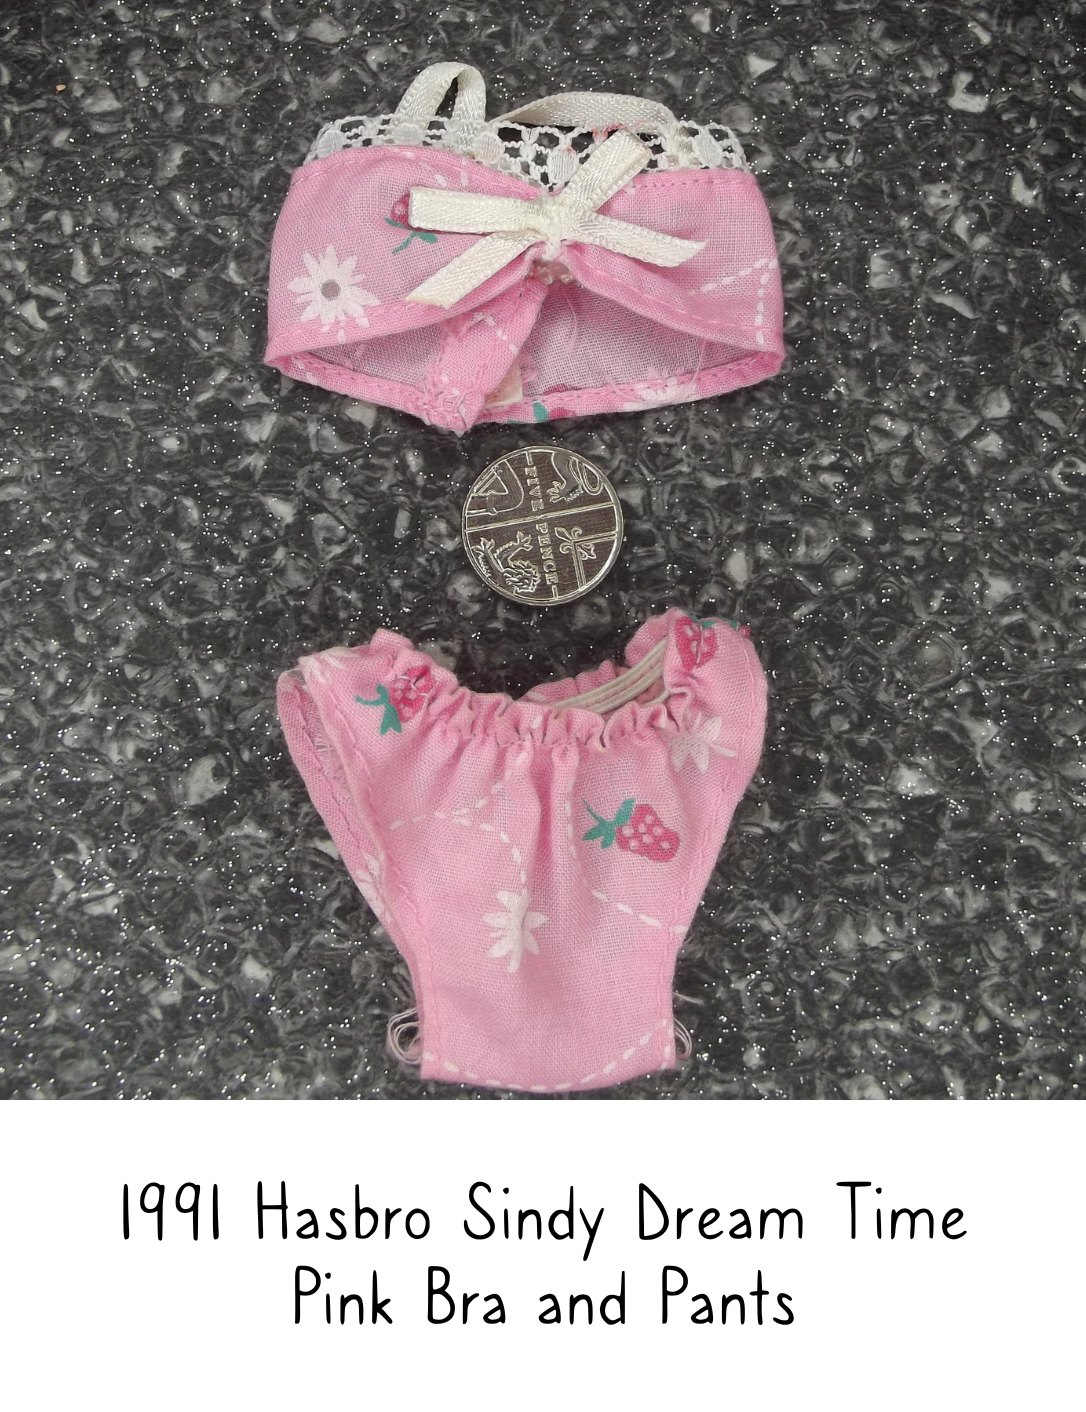 1991 Hasbro Sindy Dream Time Lingerie Collection Pink Bra and Pants